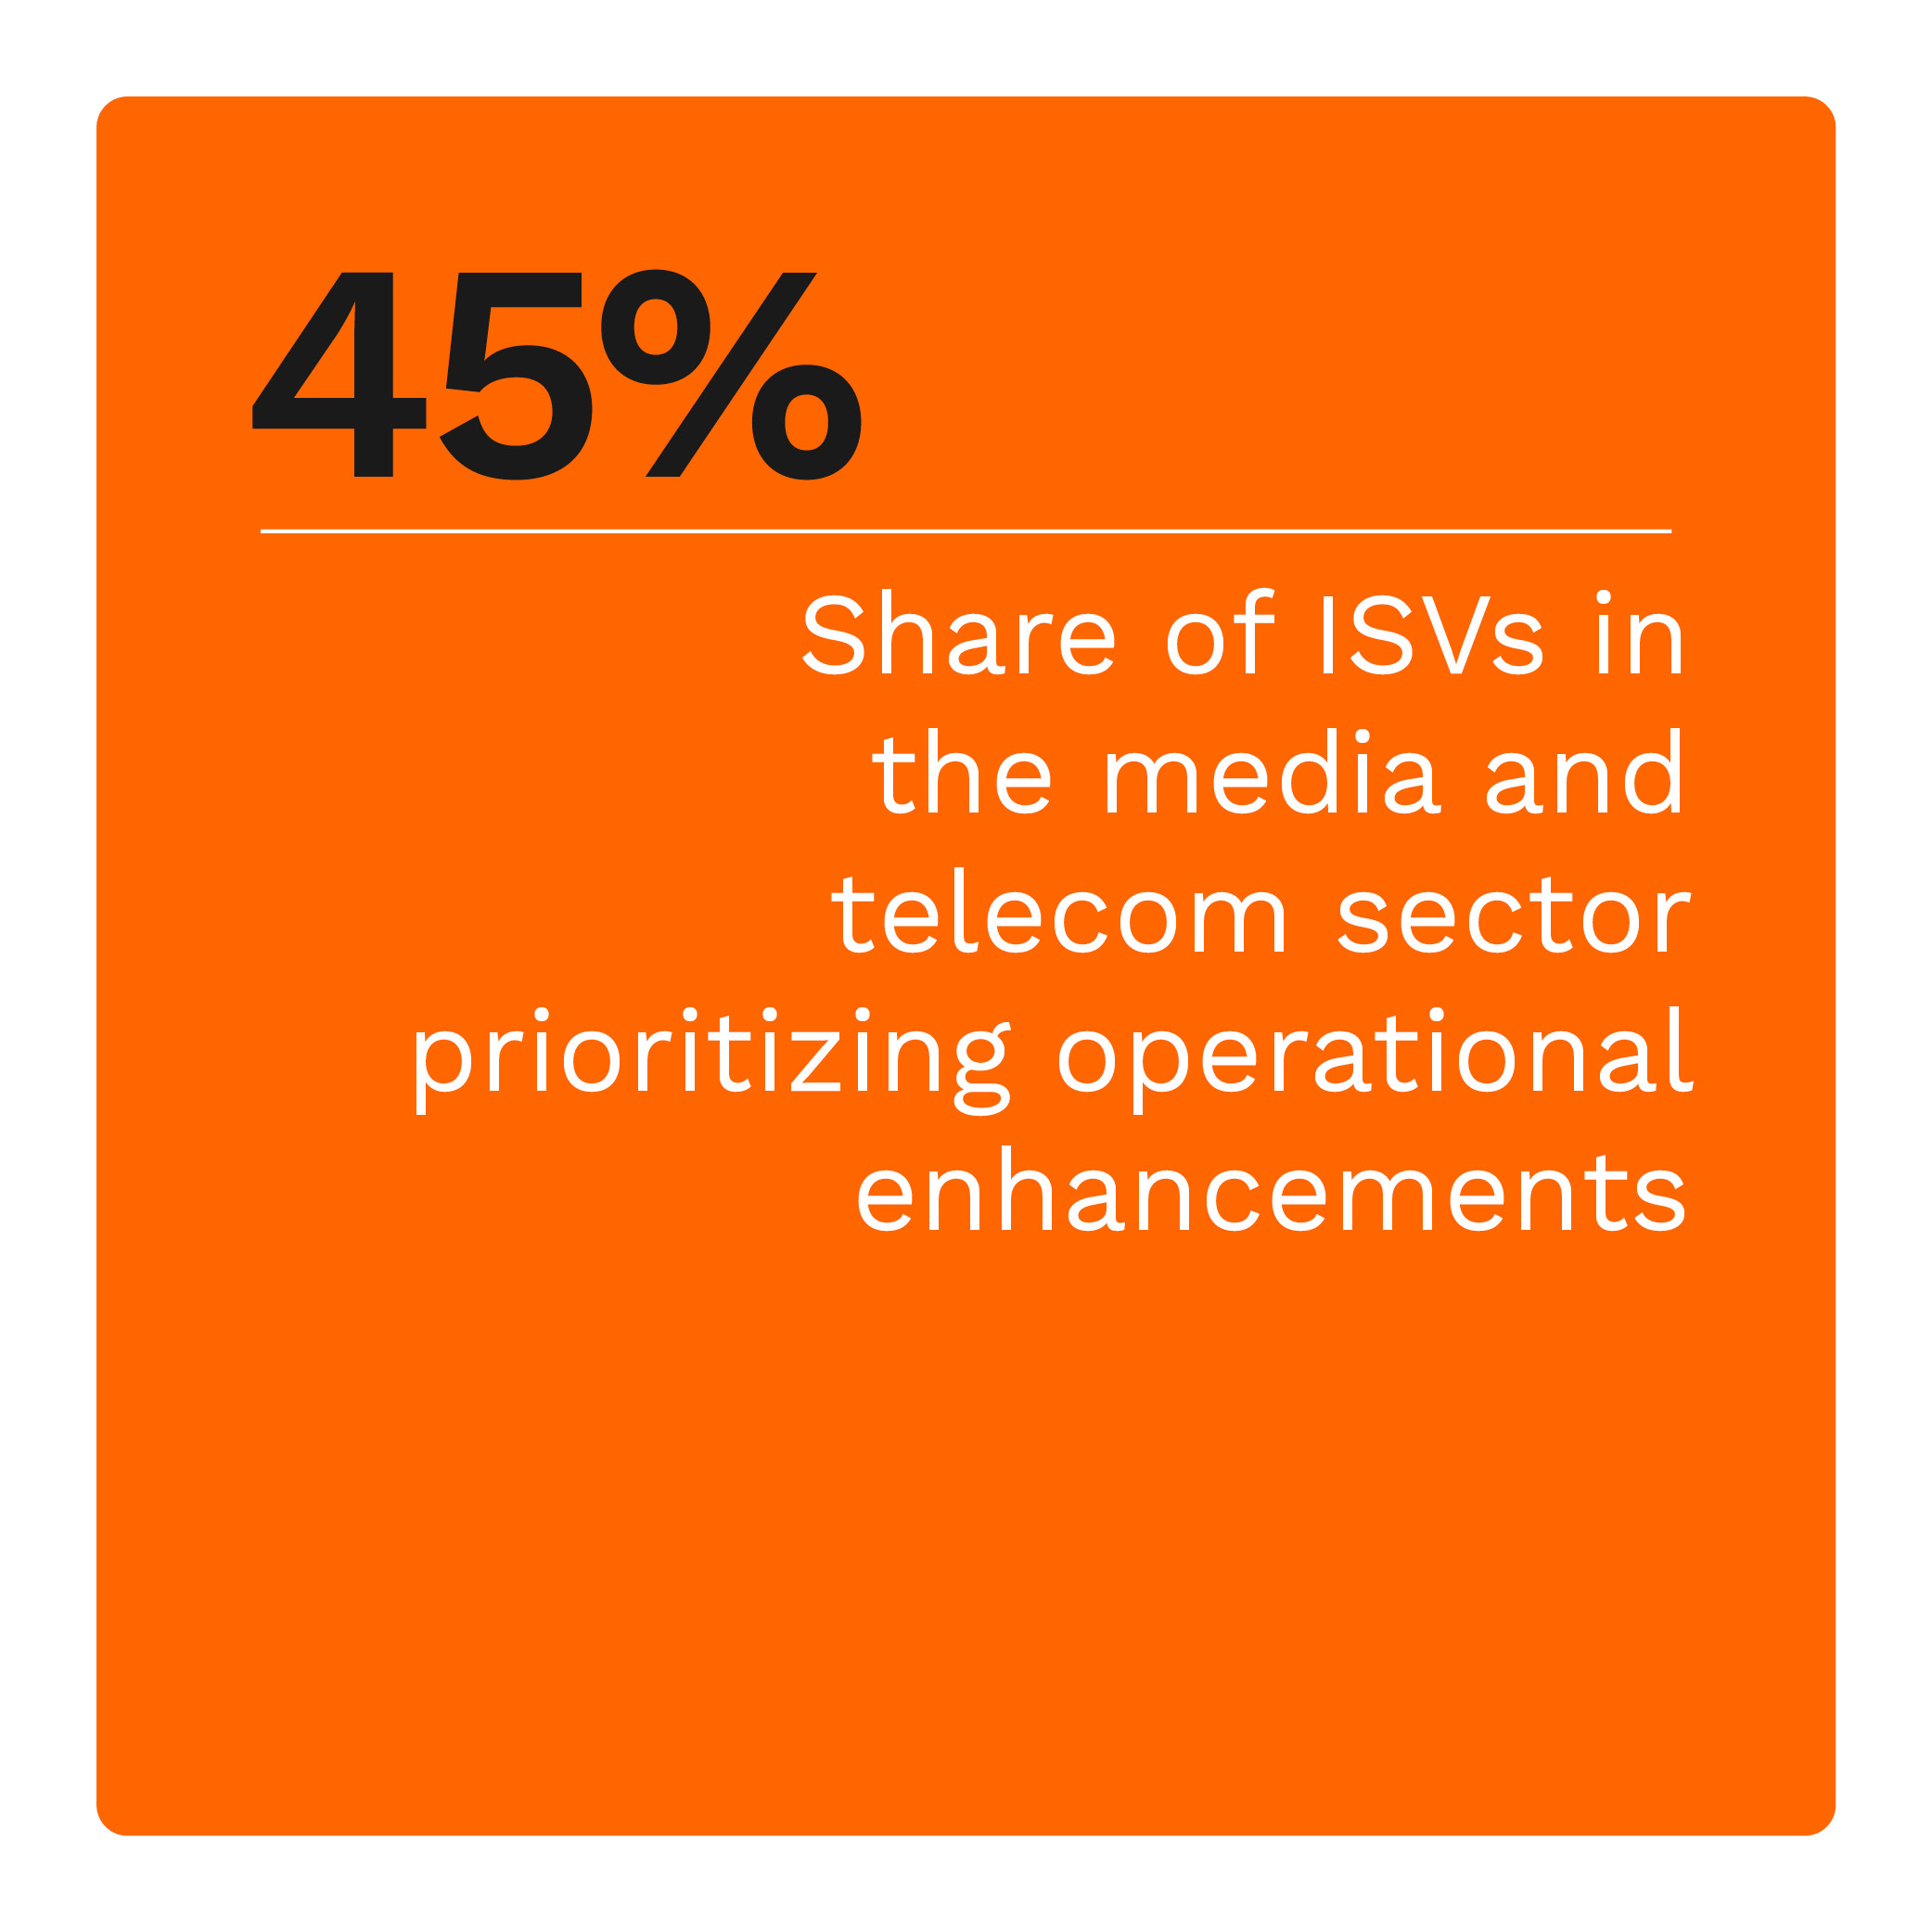 45%: Share of ISVs in the media and telecom sector prioritizing operational enhancements